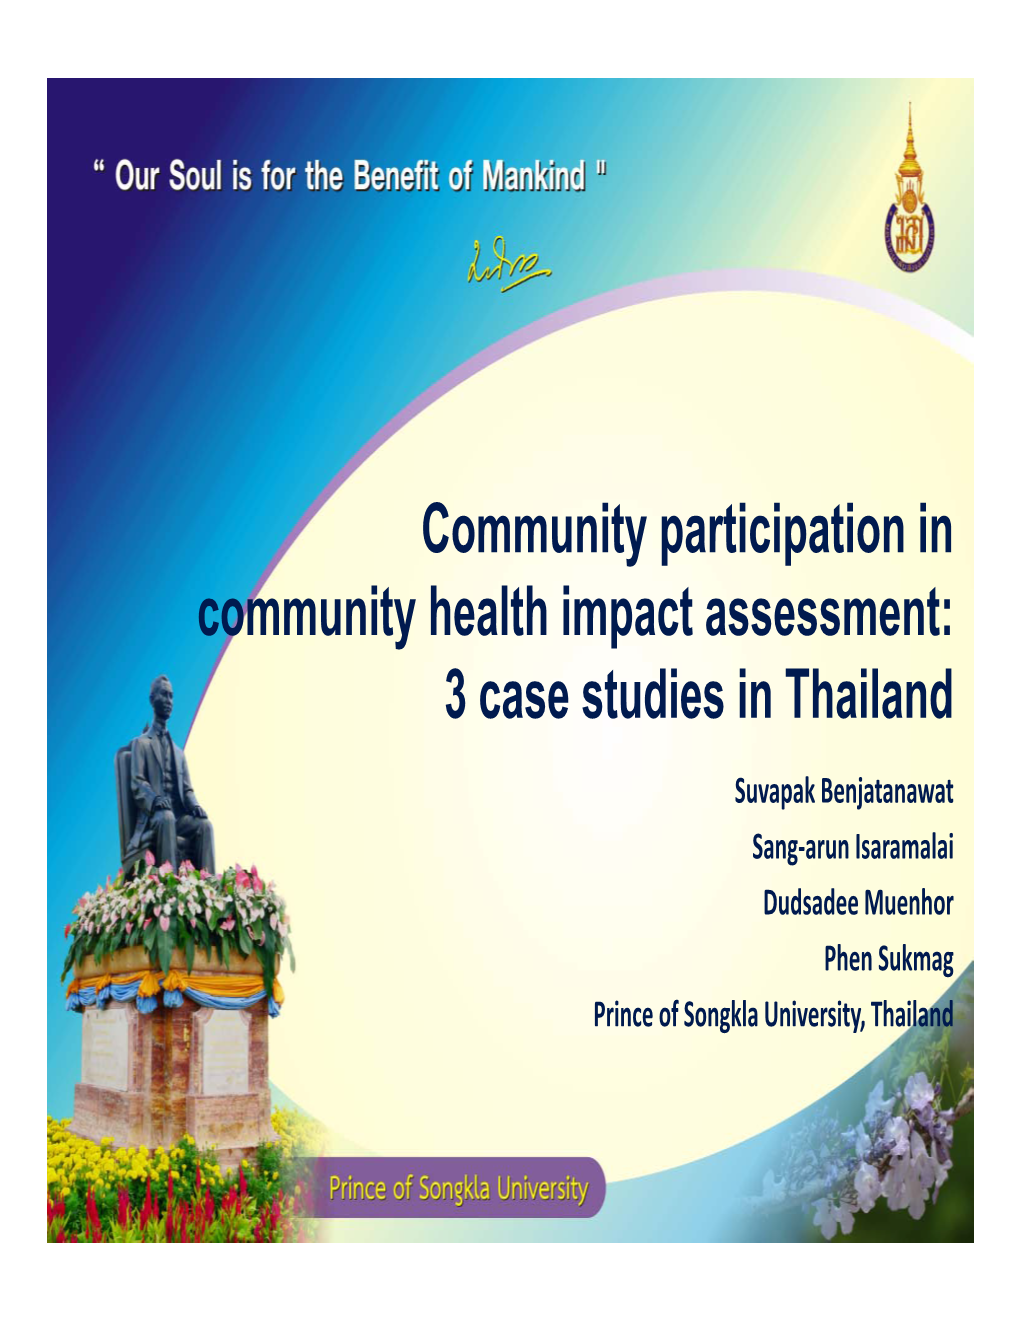 Community Participation in Community Health Impact Assessment: 3 Case Studies in Thailand